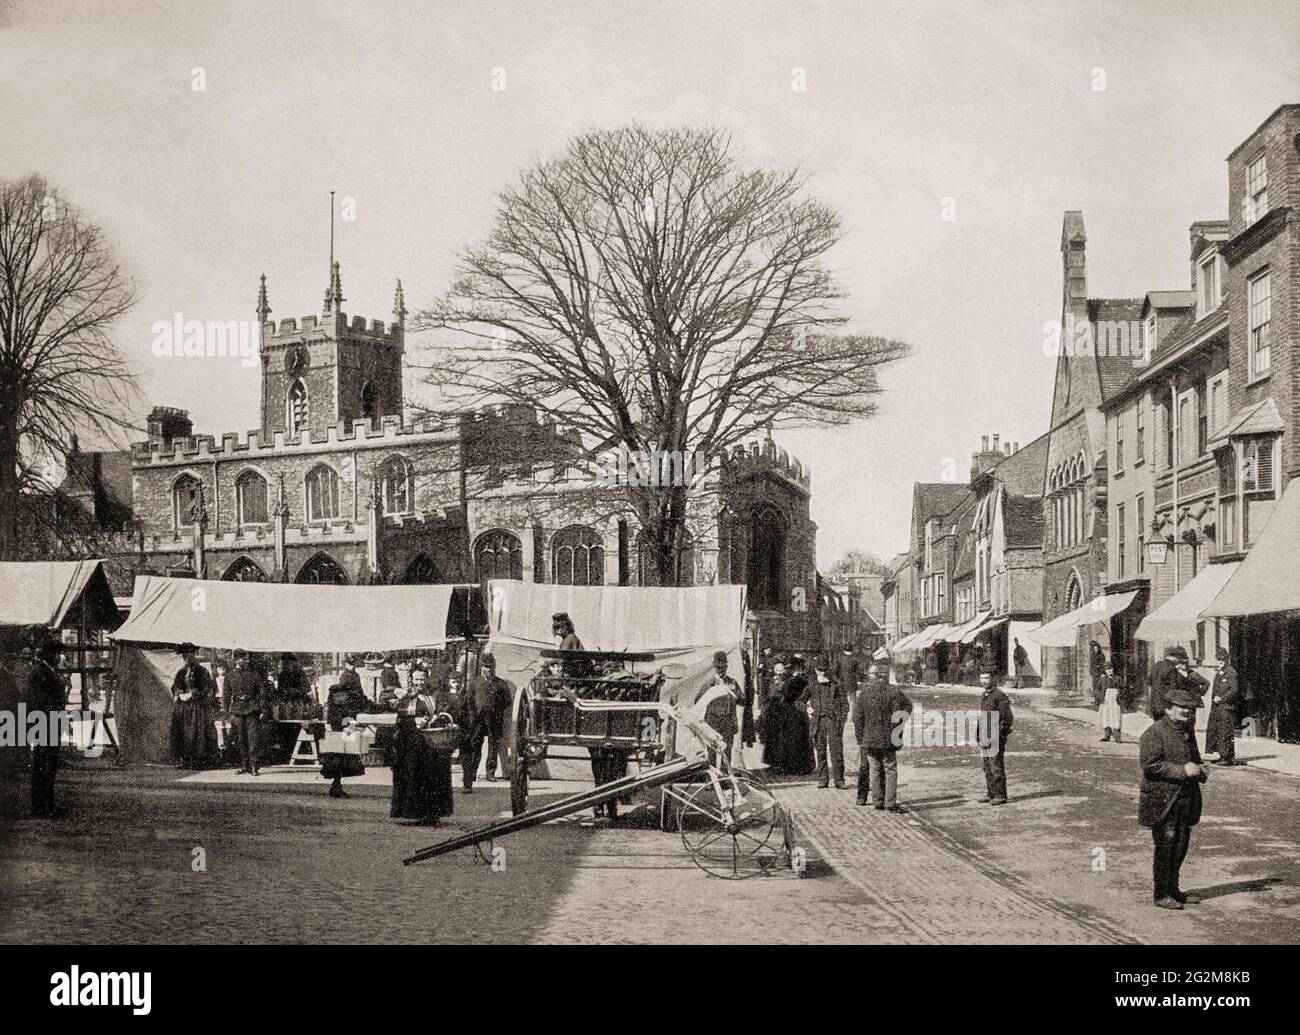 A late 19th century view of the market place in front of All Saints' Church in Huntingdon, a market town in Cambridgeshire, England, chartered by King John in 1205. It was the birthplace of Oliver Cromwell in 1599, who became its Member of Parliament (MP) in the 17th century. Stock Photo